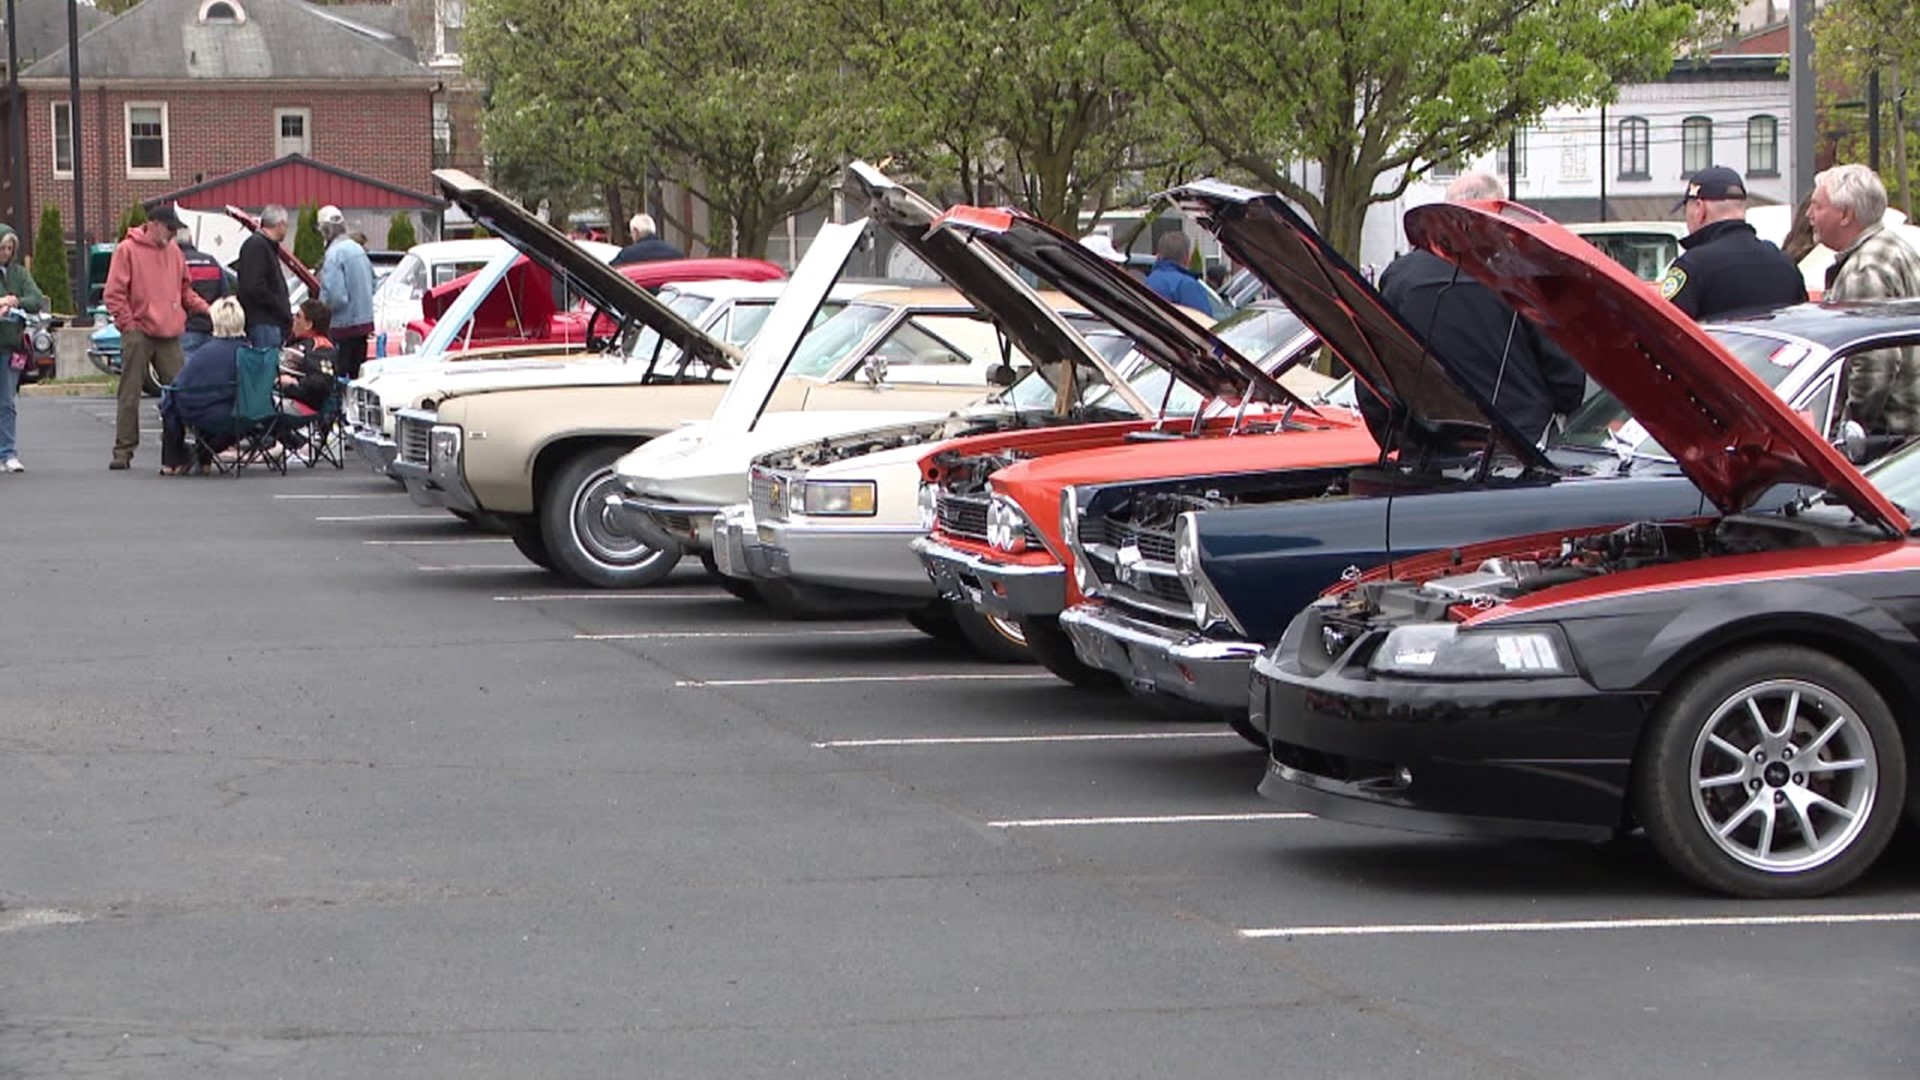 Wilkes University hosted a car show and job fair at the campus in Wilkes-Barre on Sunday.